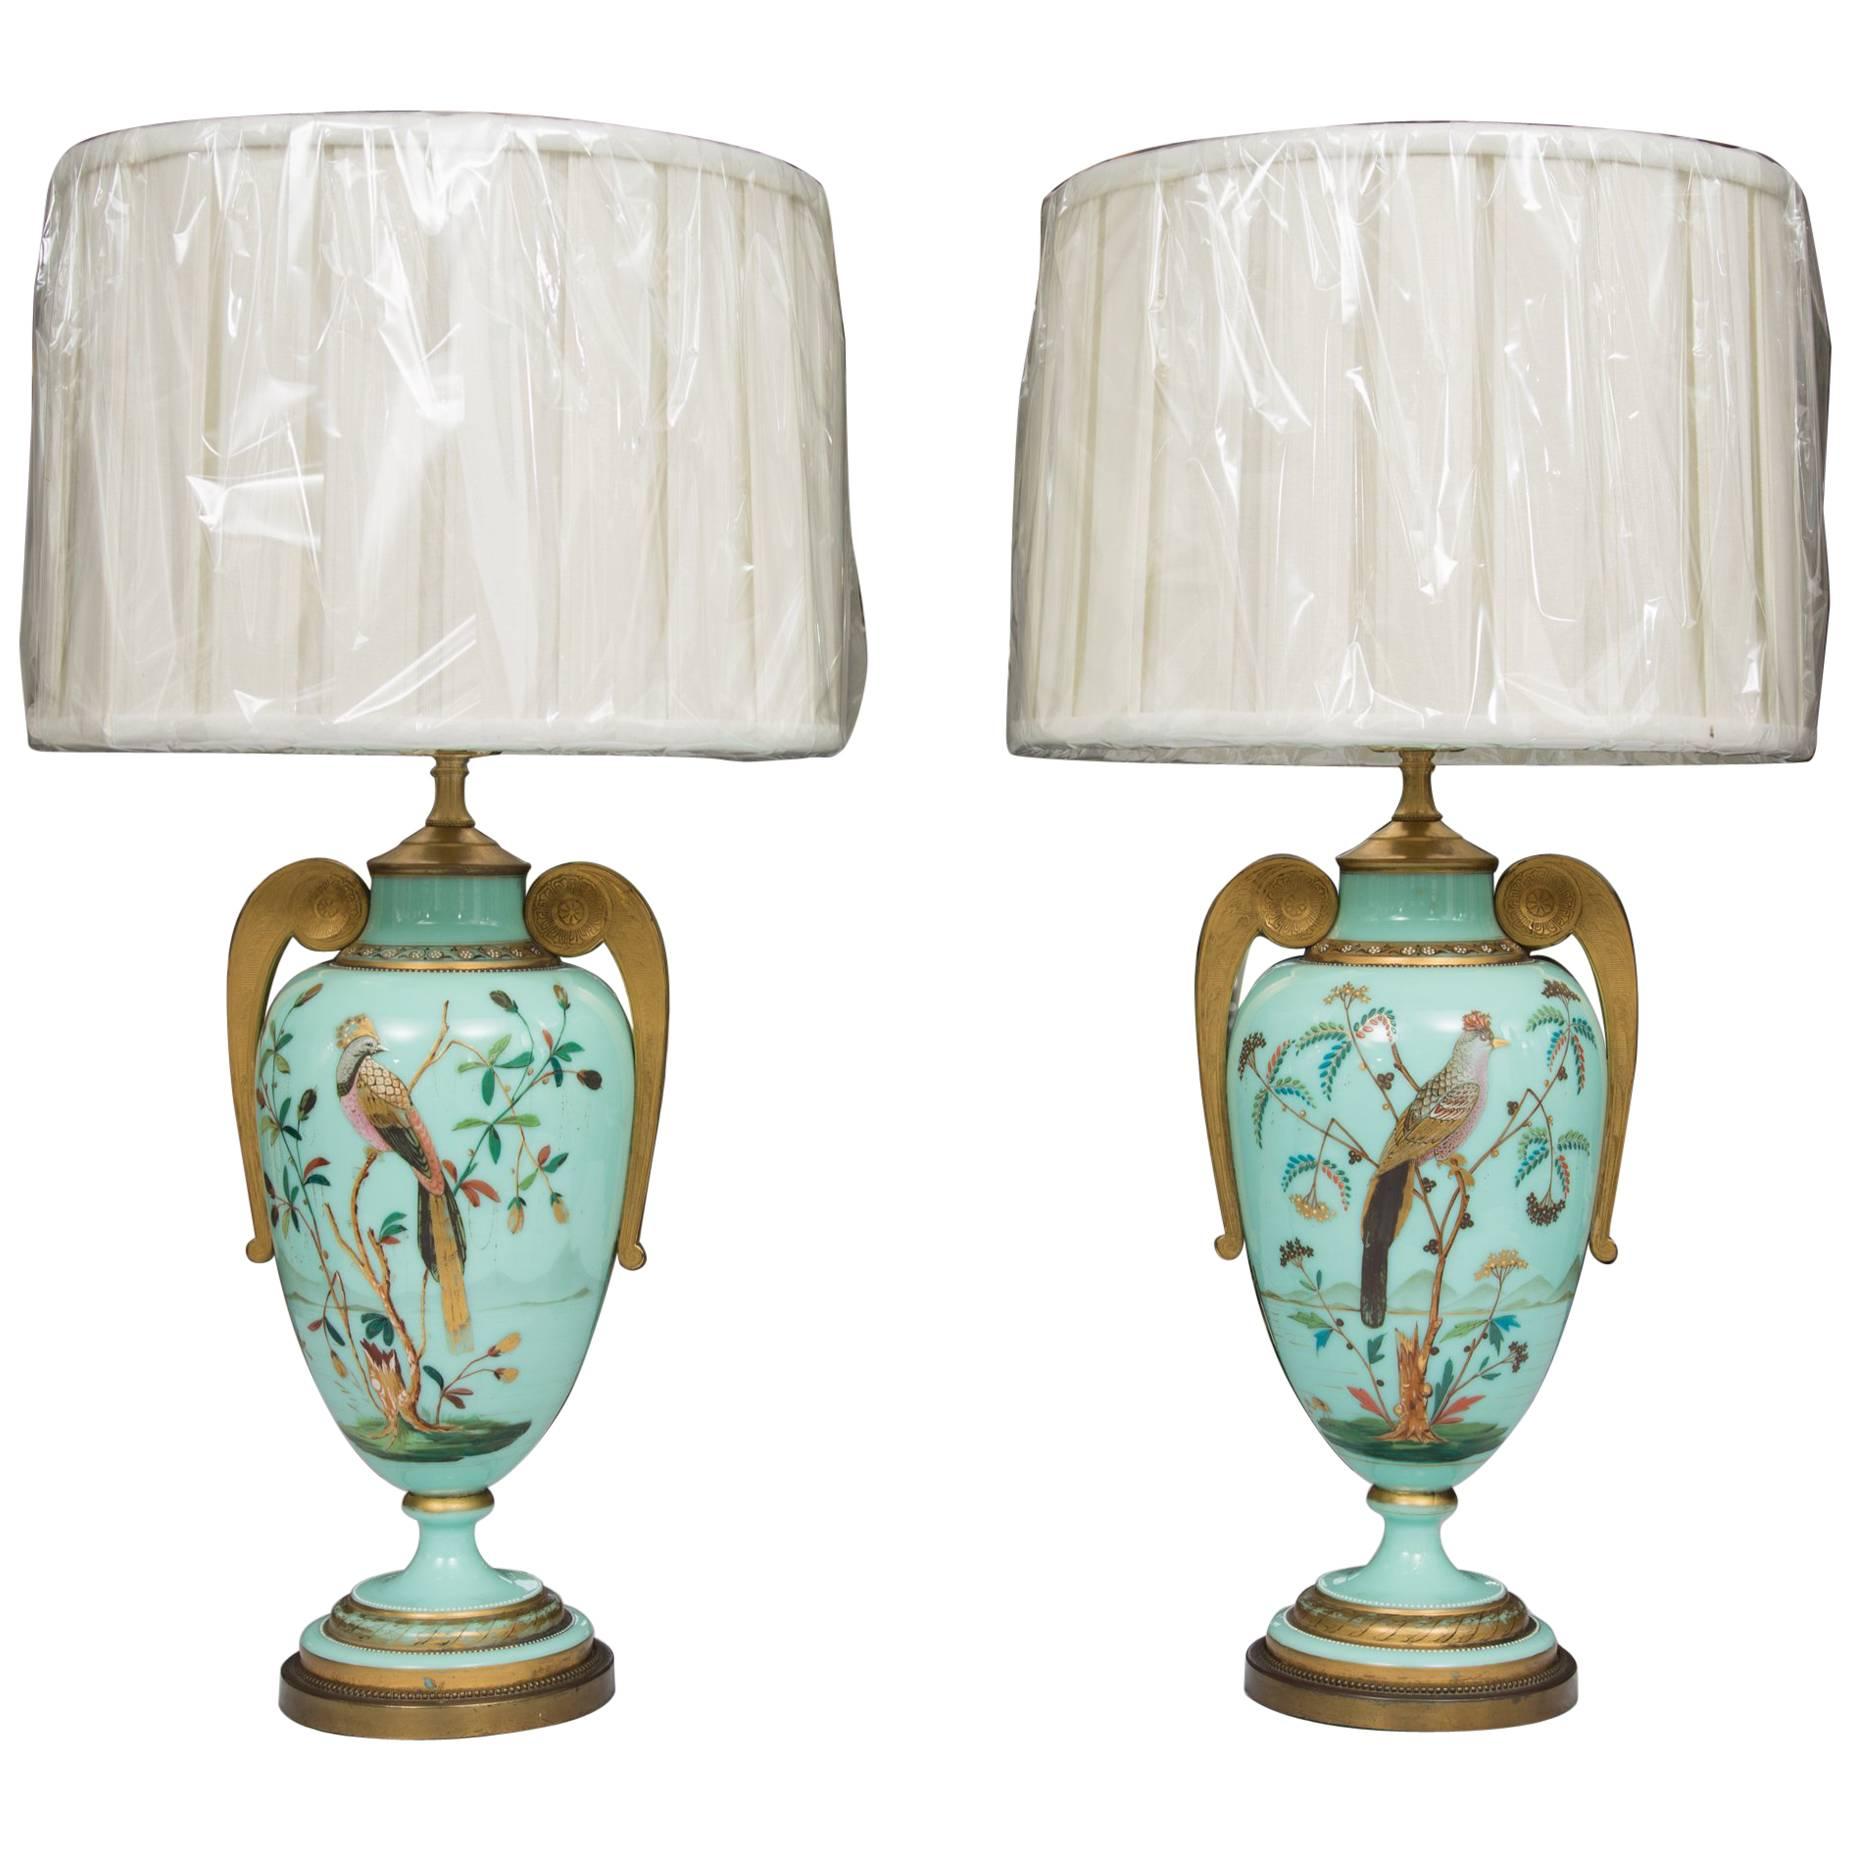 19th Century Hand-Painted French Opaline Lamps